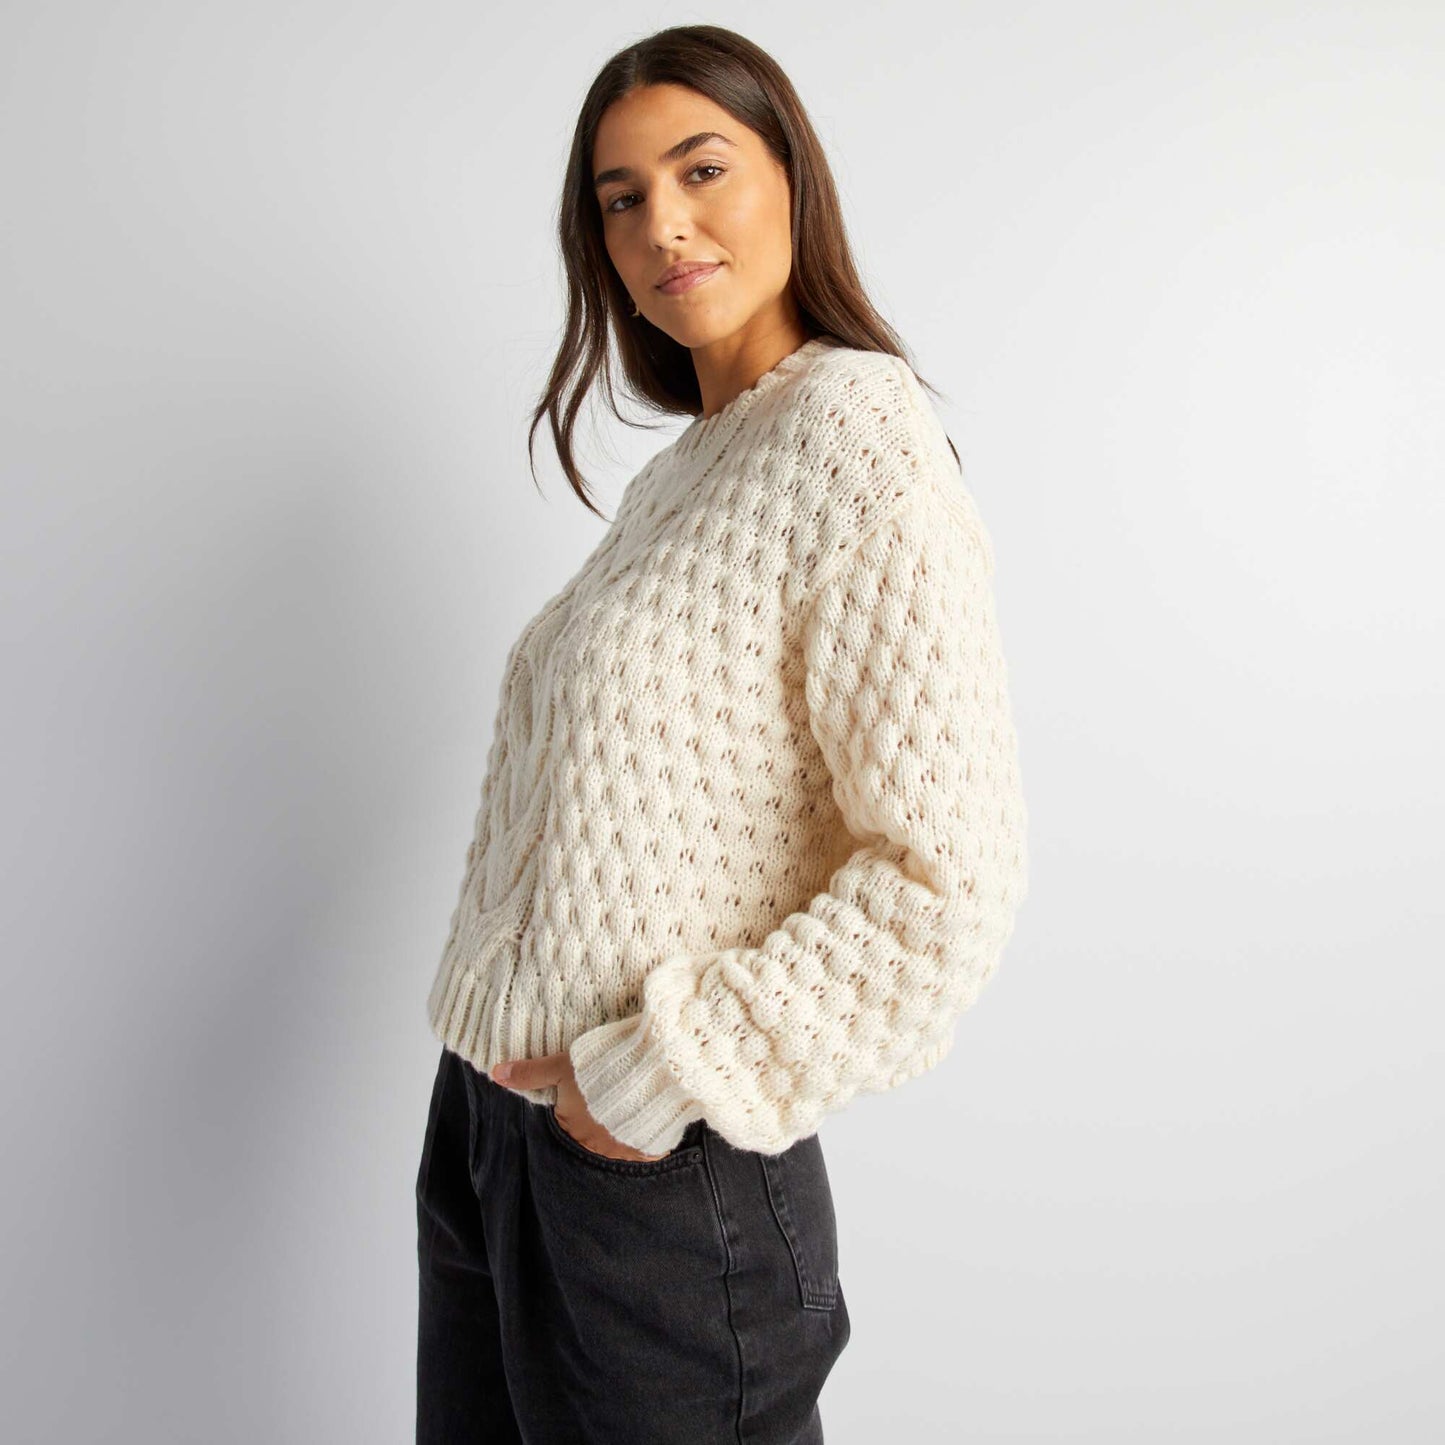 Woven knit sweater WHITE EGG